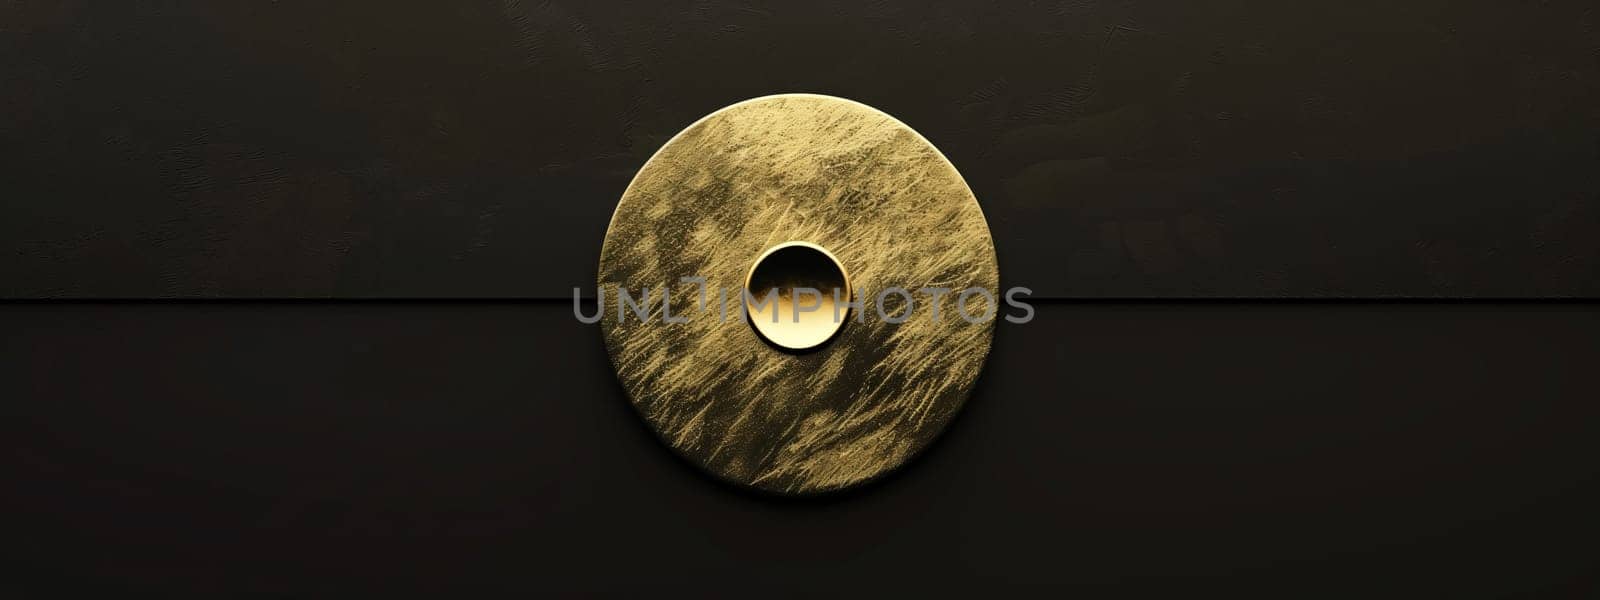 Bronze circle with a hole, resembling a musical instrument, on dark background by richwolf